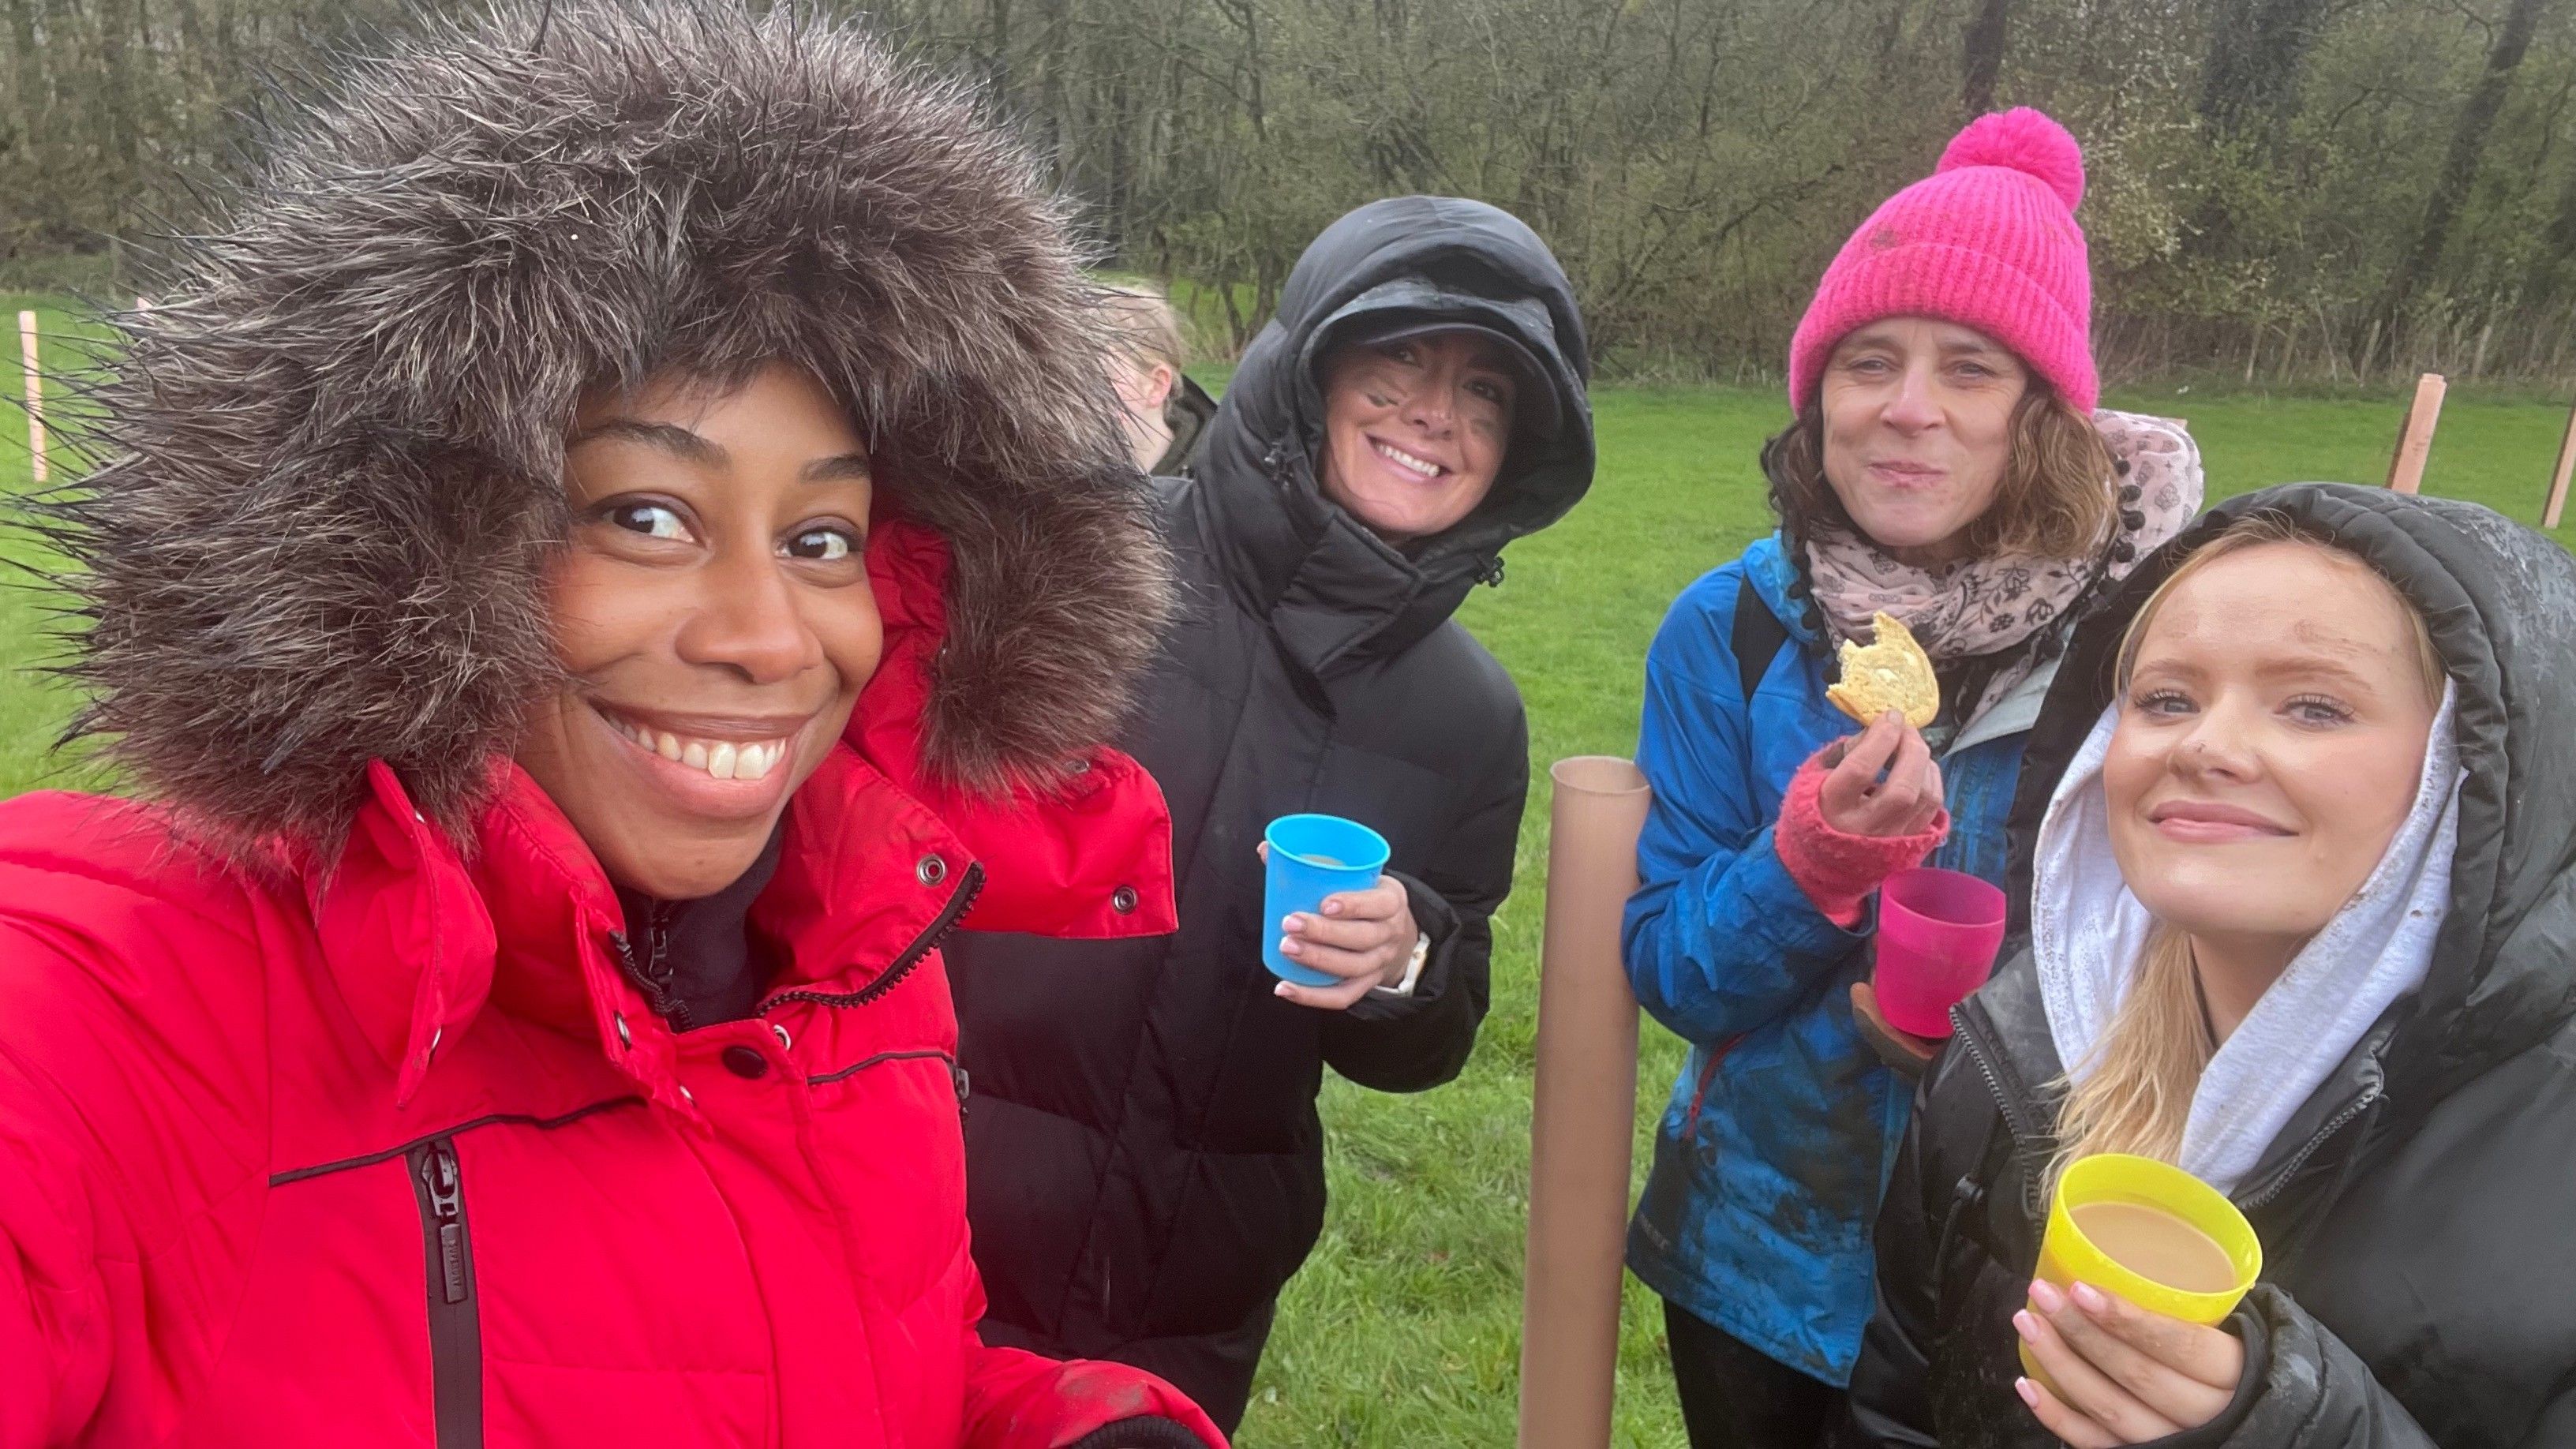 UX Researcher Kahmila Brown recently spent the day with colleagues supporting a local environmental charity, the Ribble Rivers Trust.